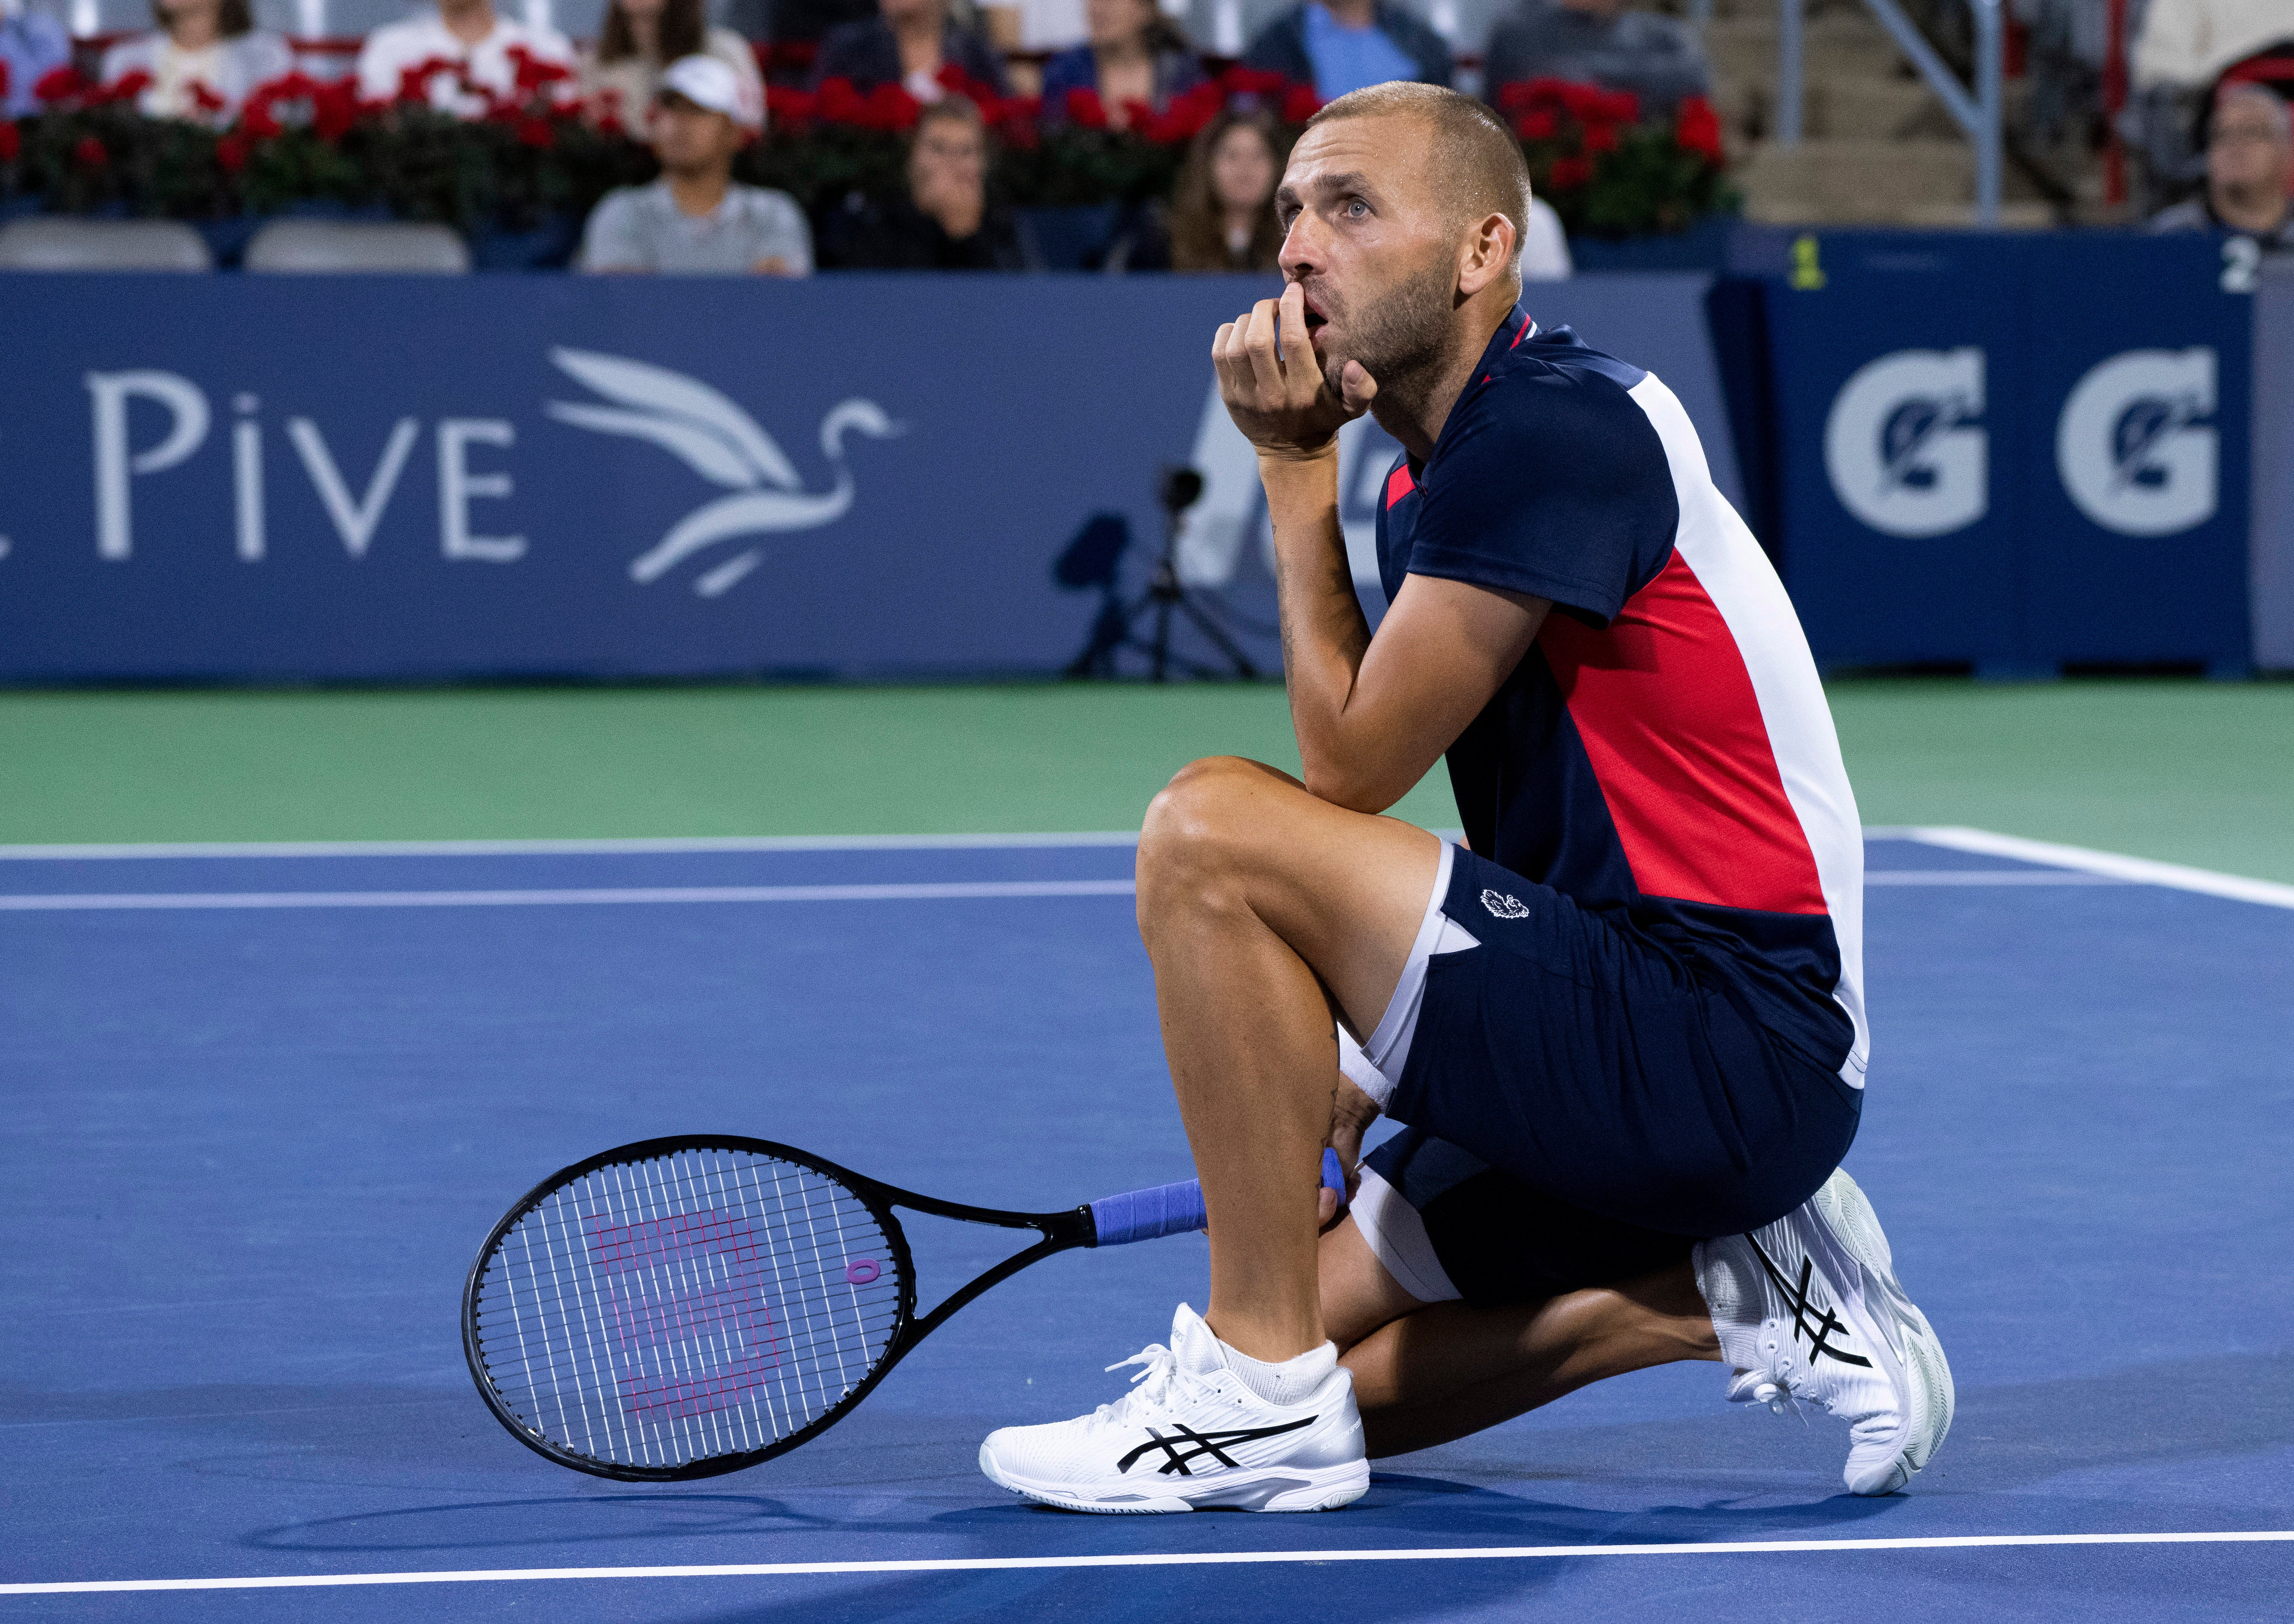 Dan Evans’ impressive run at the National Bank Open has been halted by Pablo Carreno Busta, who defeated the Briton in three sets in Montreal (Paul Chiasson/The Canadian Press/AP)